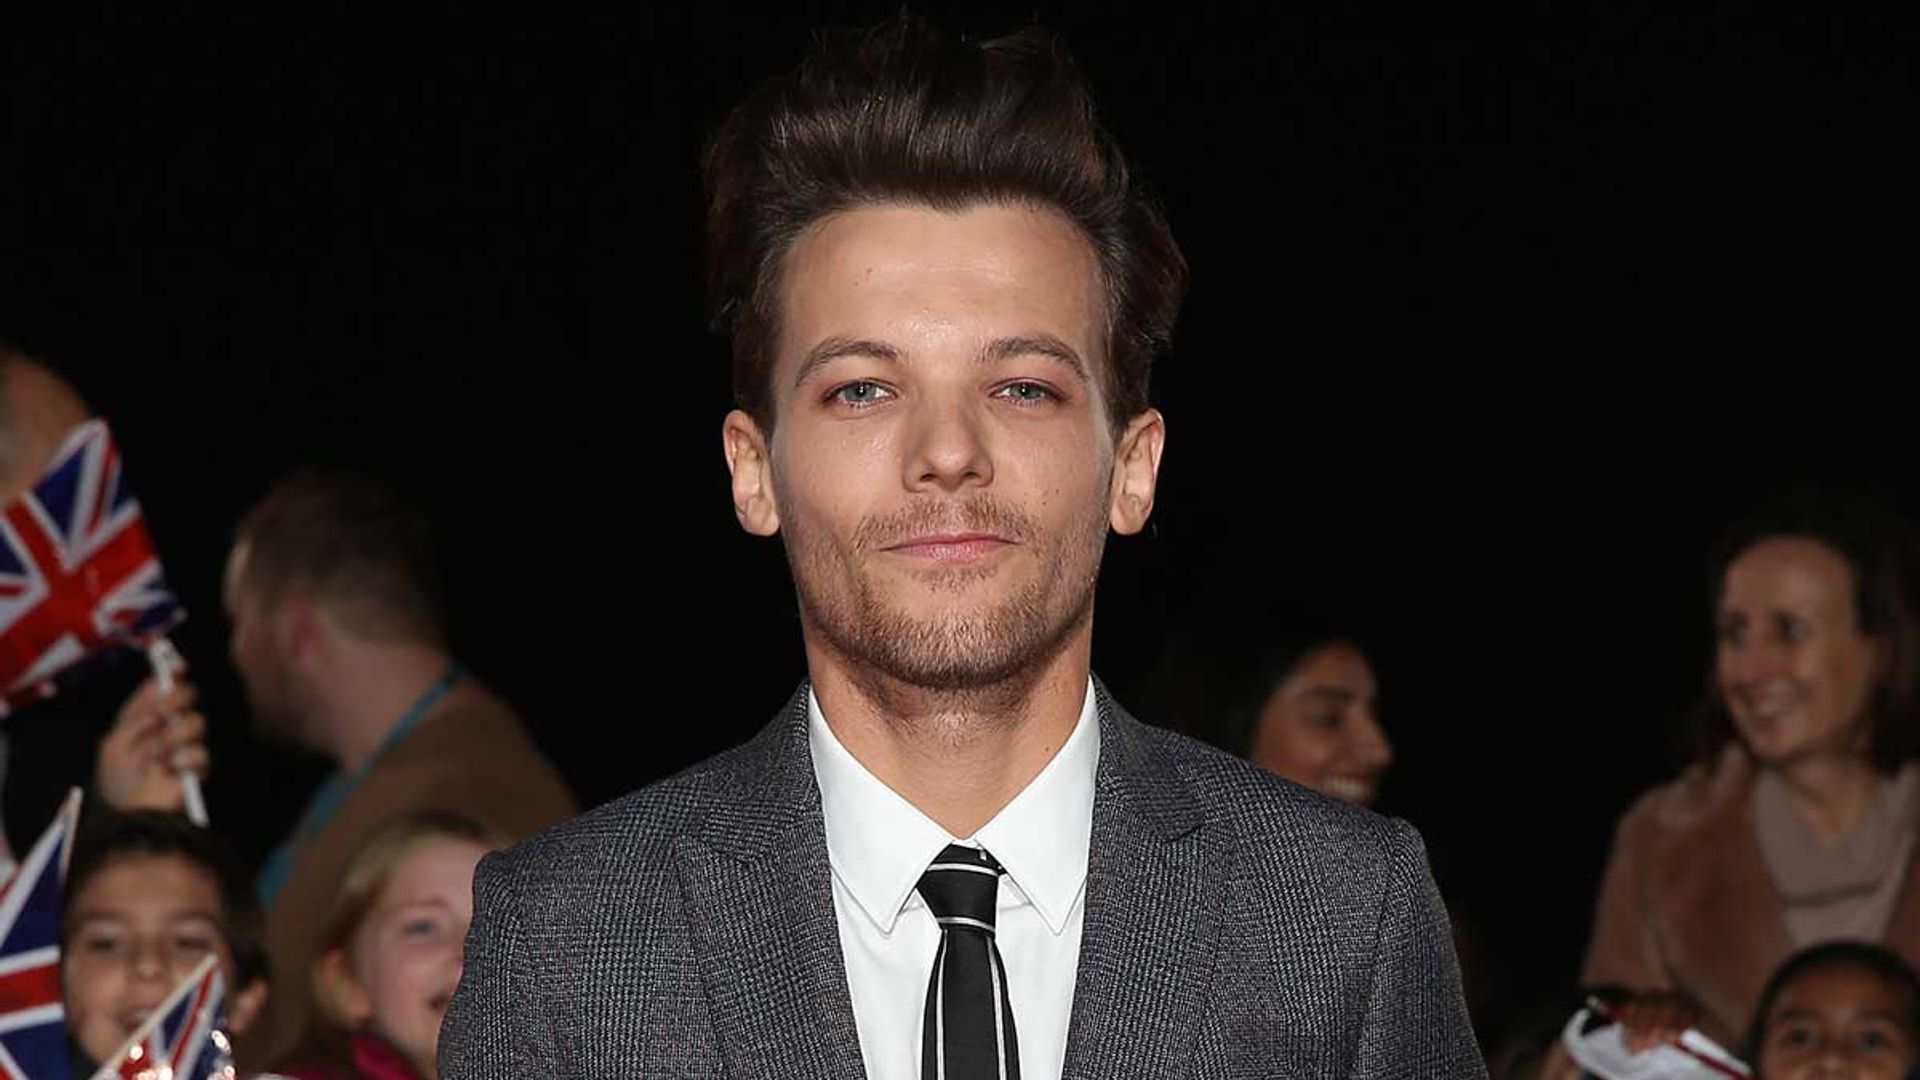 Louis Tomlinson details his experience with grief in first aired interview since sister's death